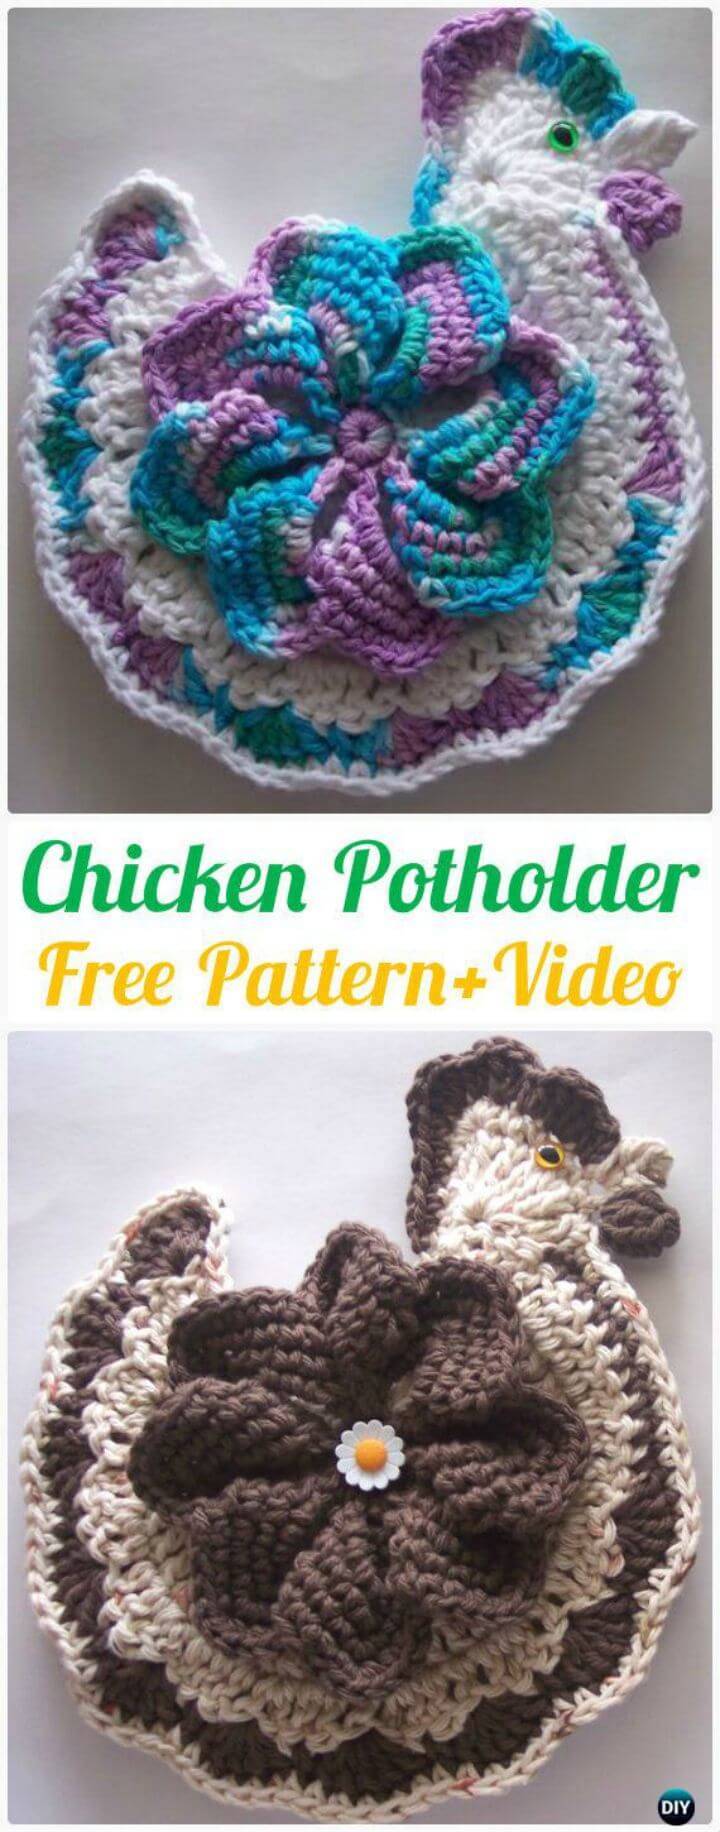 Easy Free Crochet Chicken Potholder Tutorial With Video